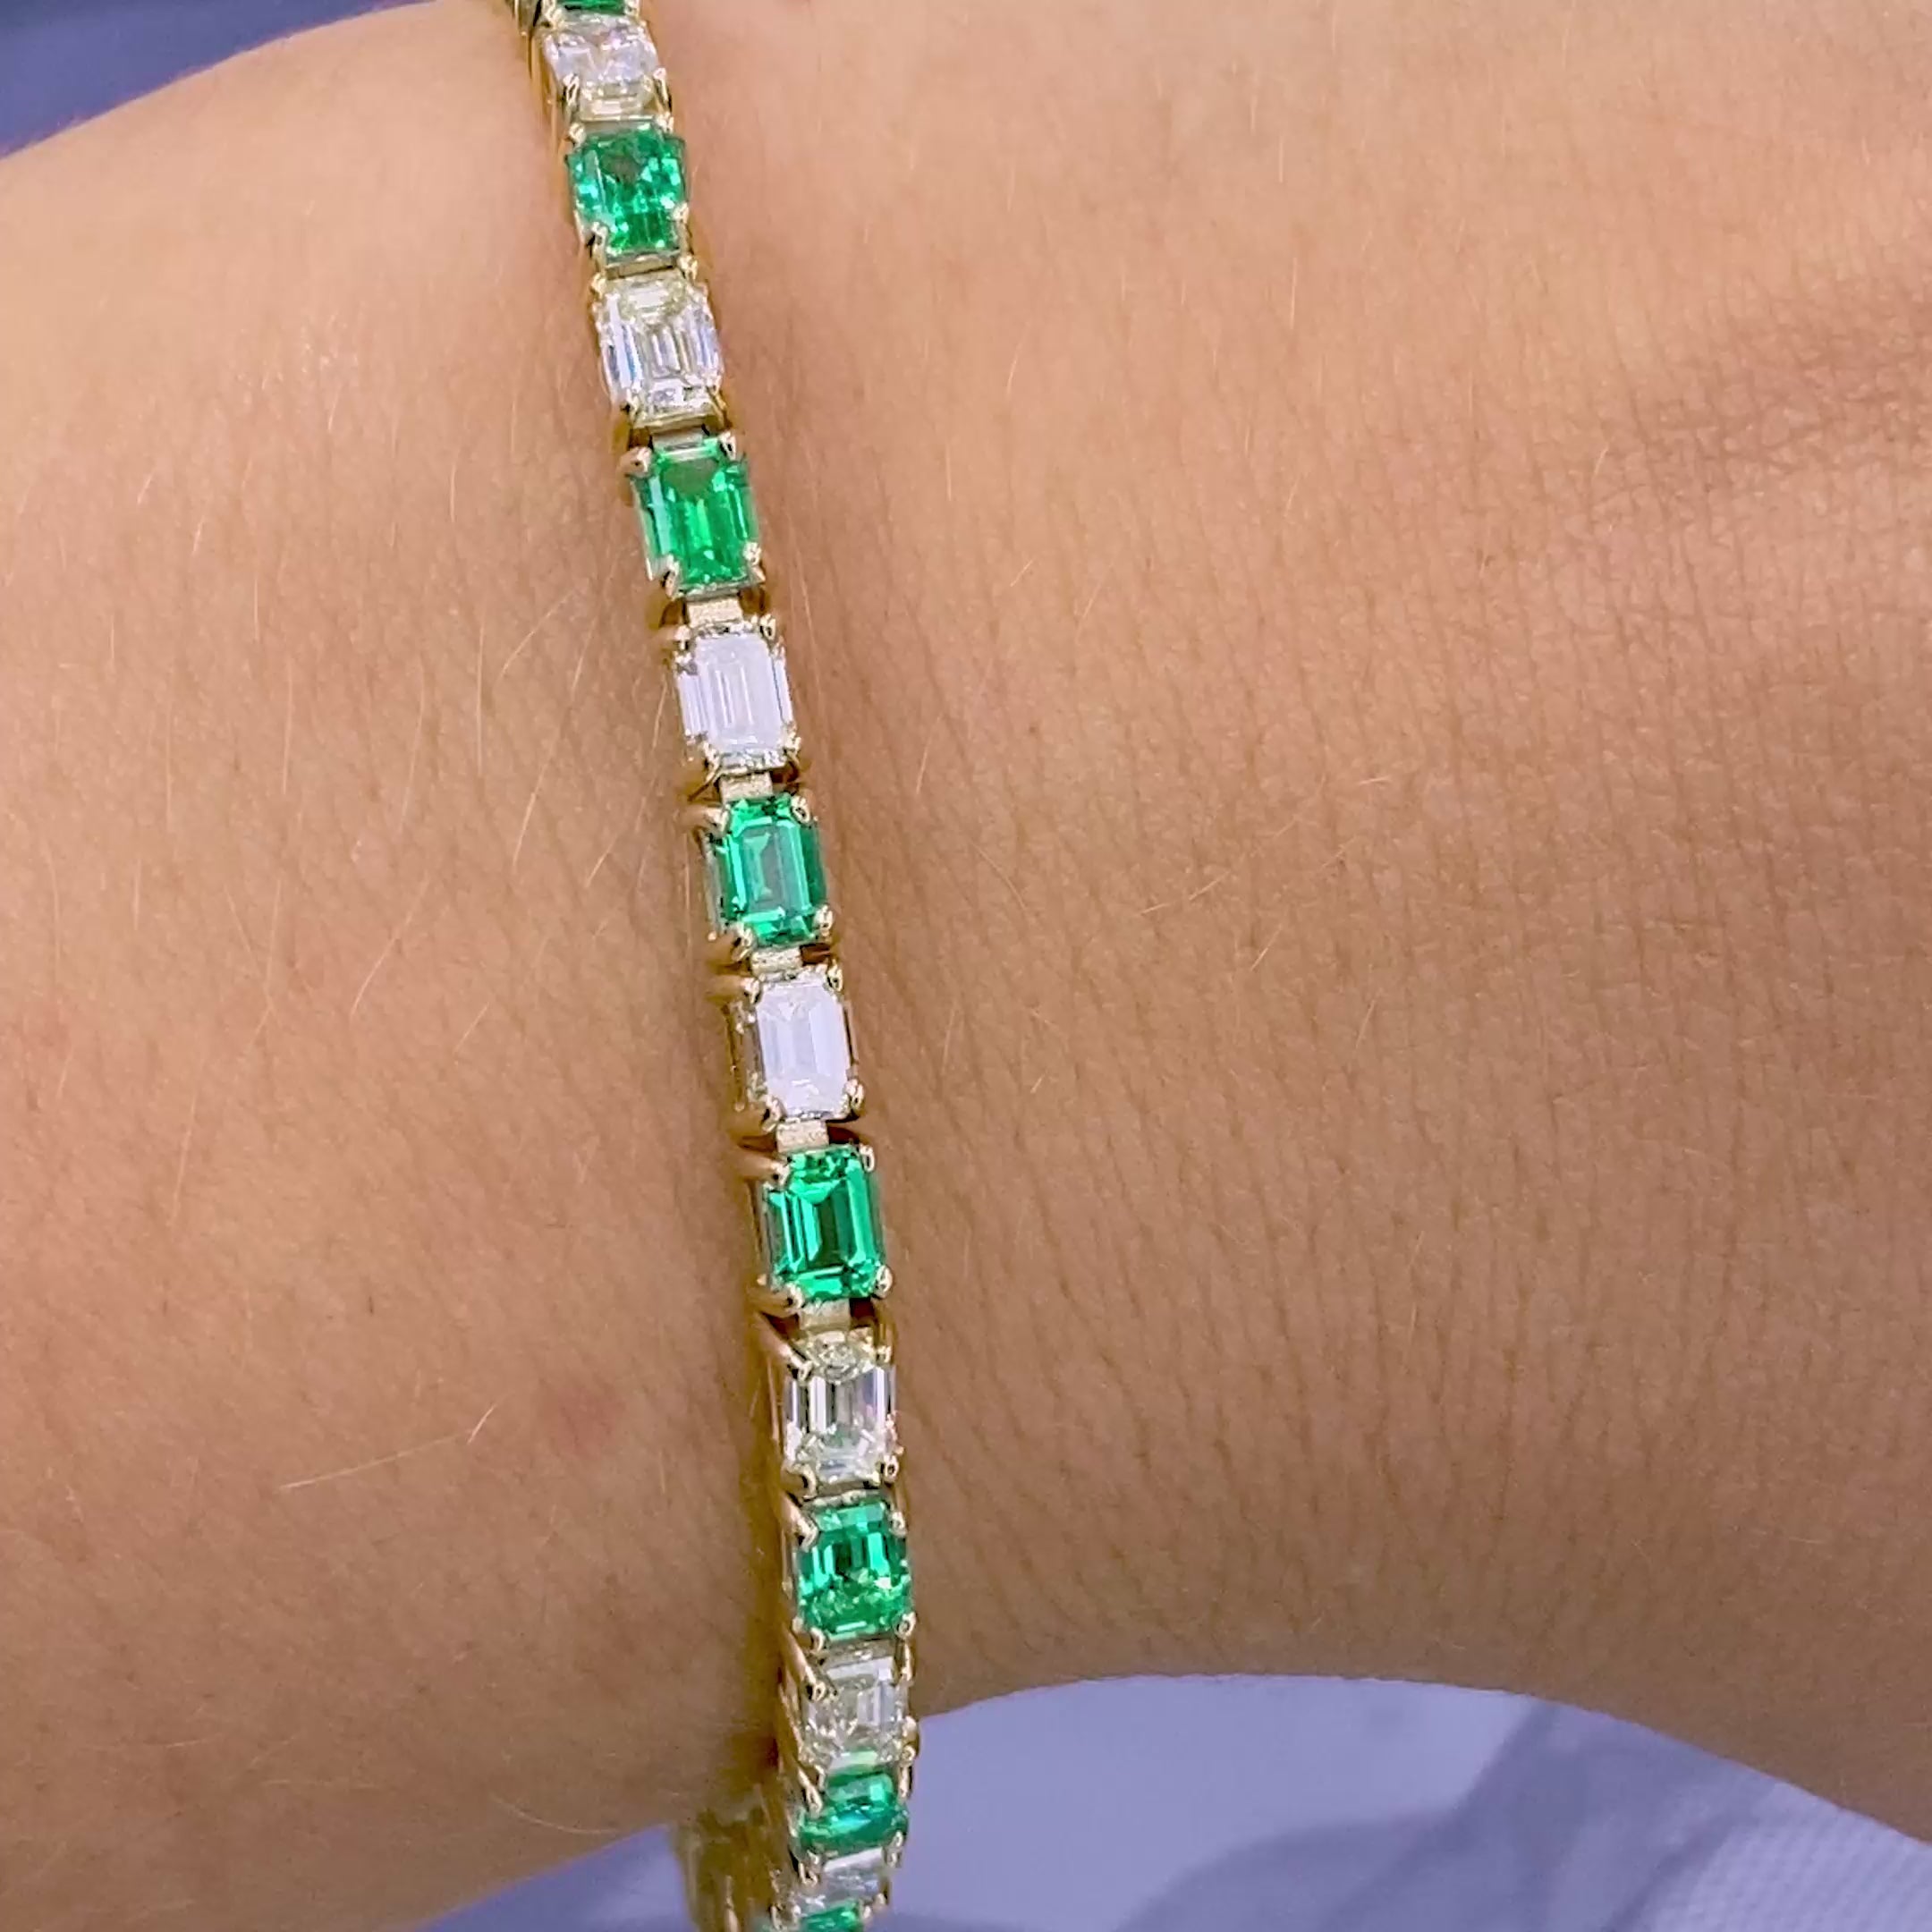 Extravagant 8.00CT Emerald Cut Diamond and Green Emerald Tennis Bracelet in 14KT Yellow Gold